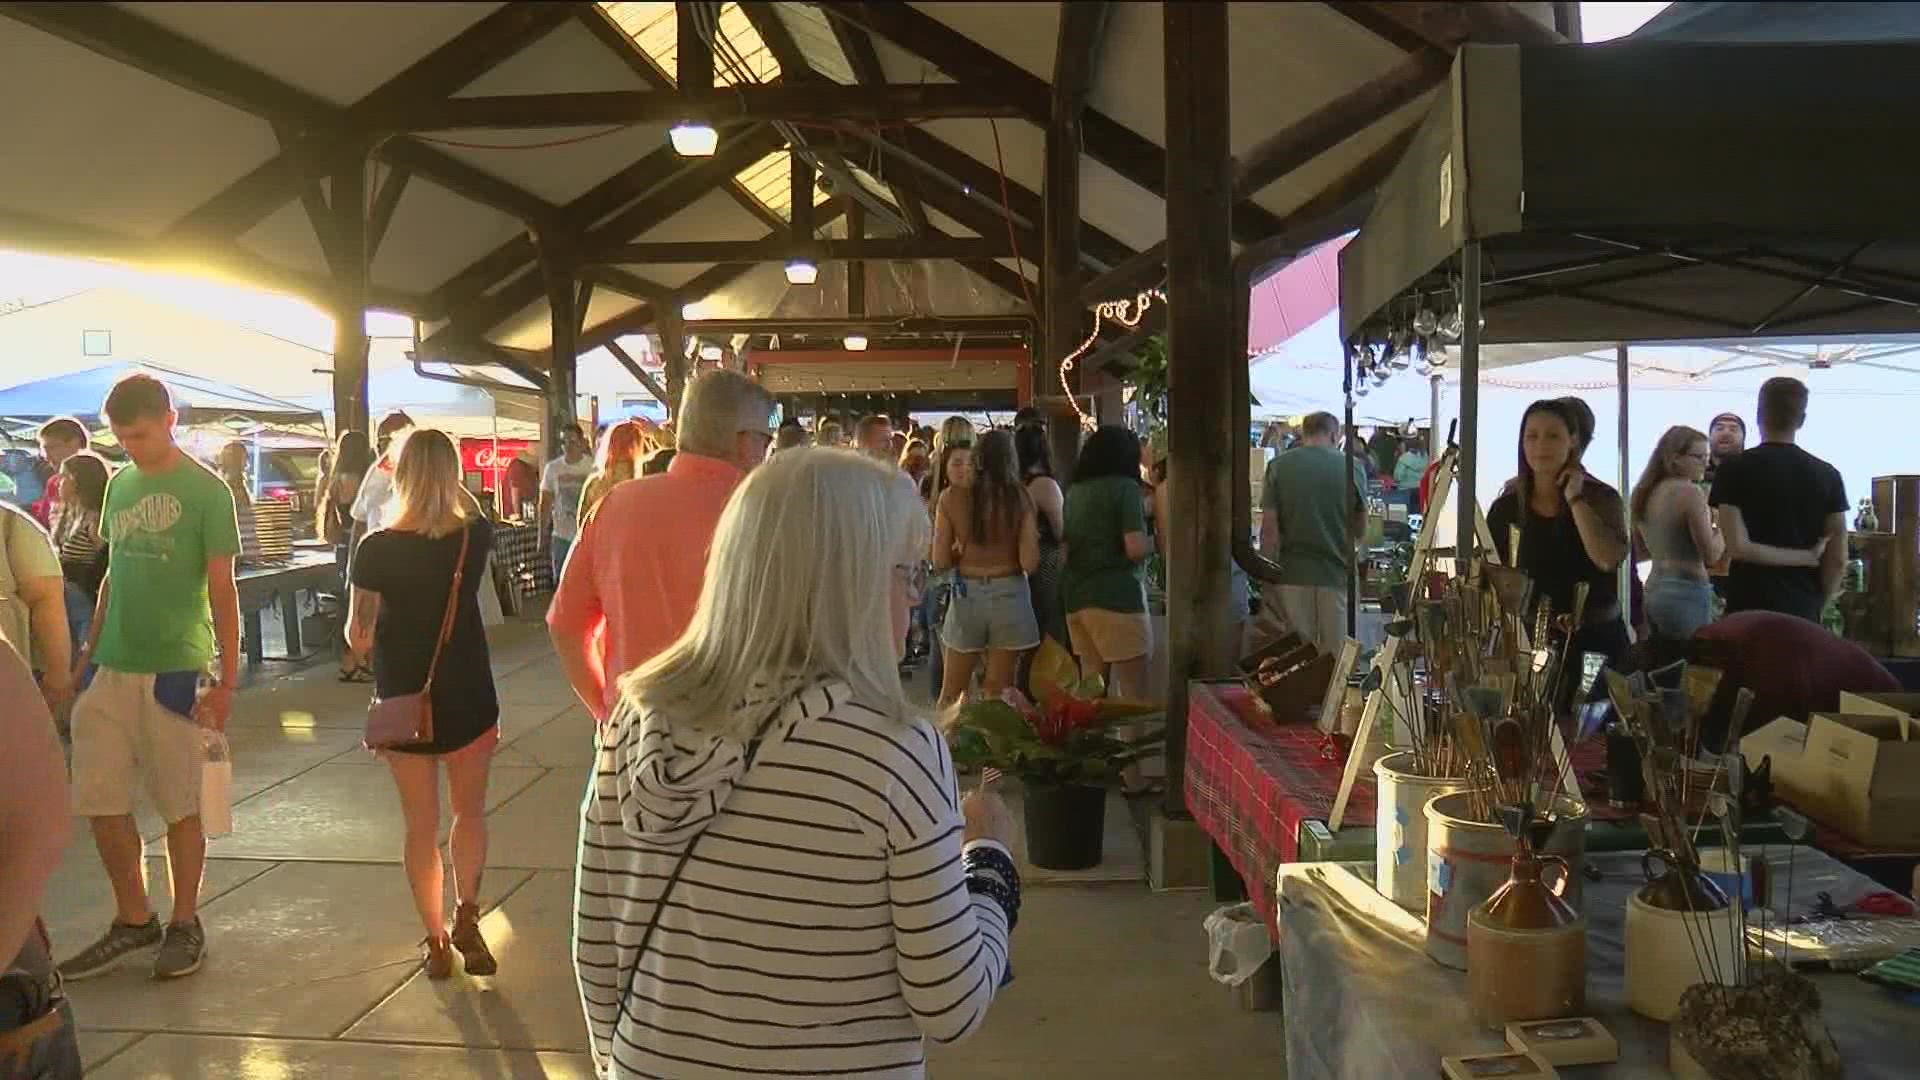 The night market runs from 6 p.m. to 11 p.m.